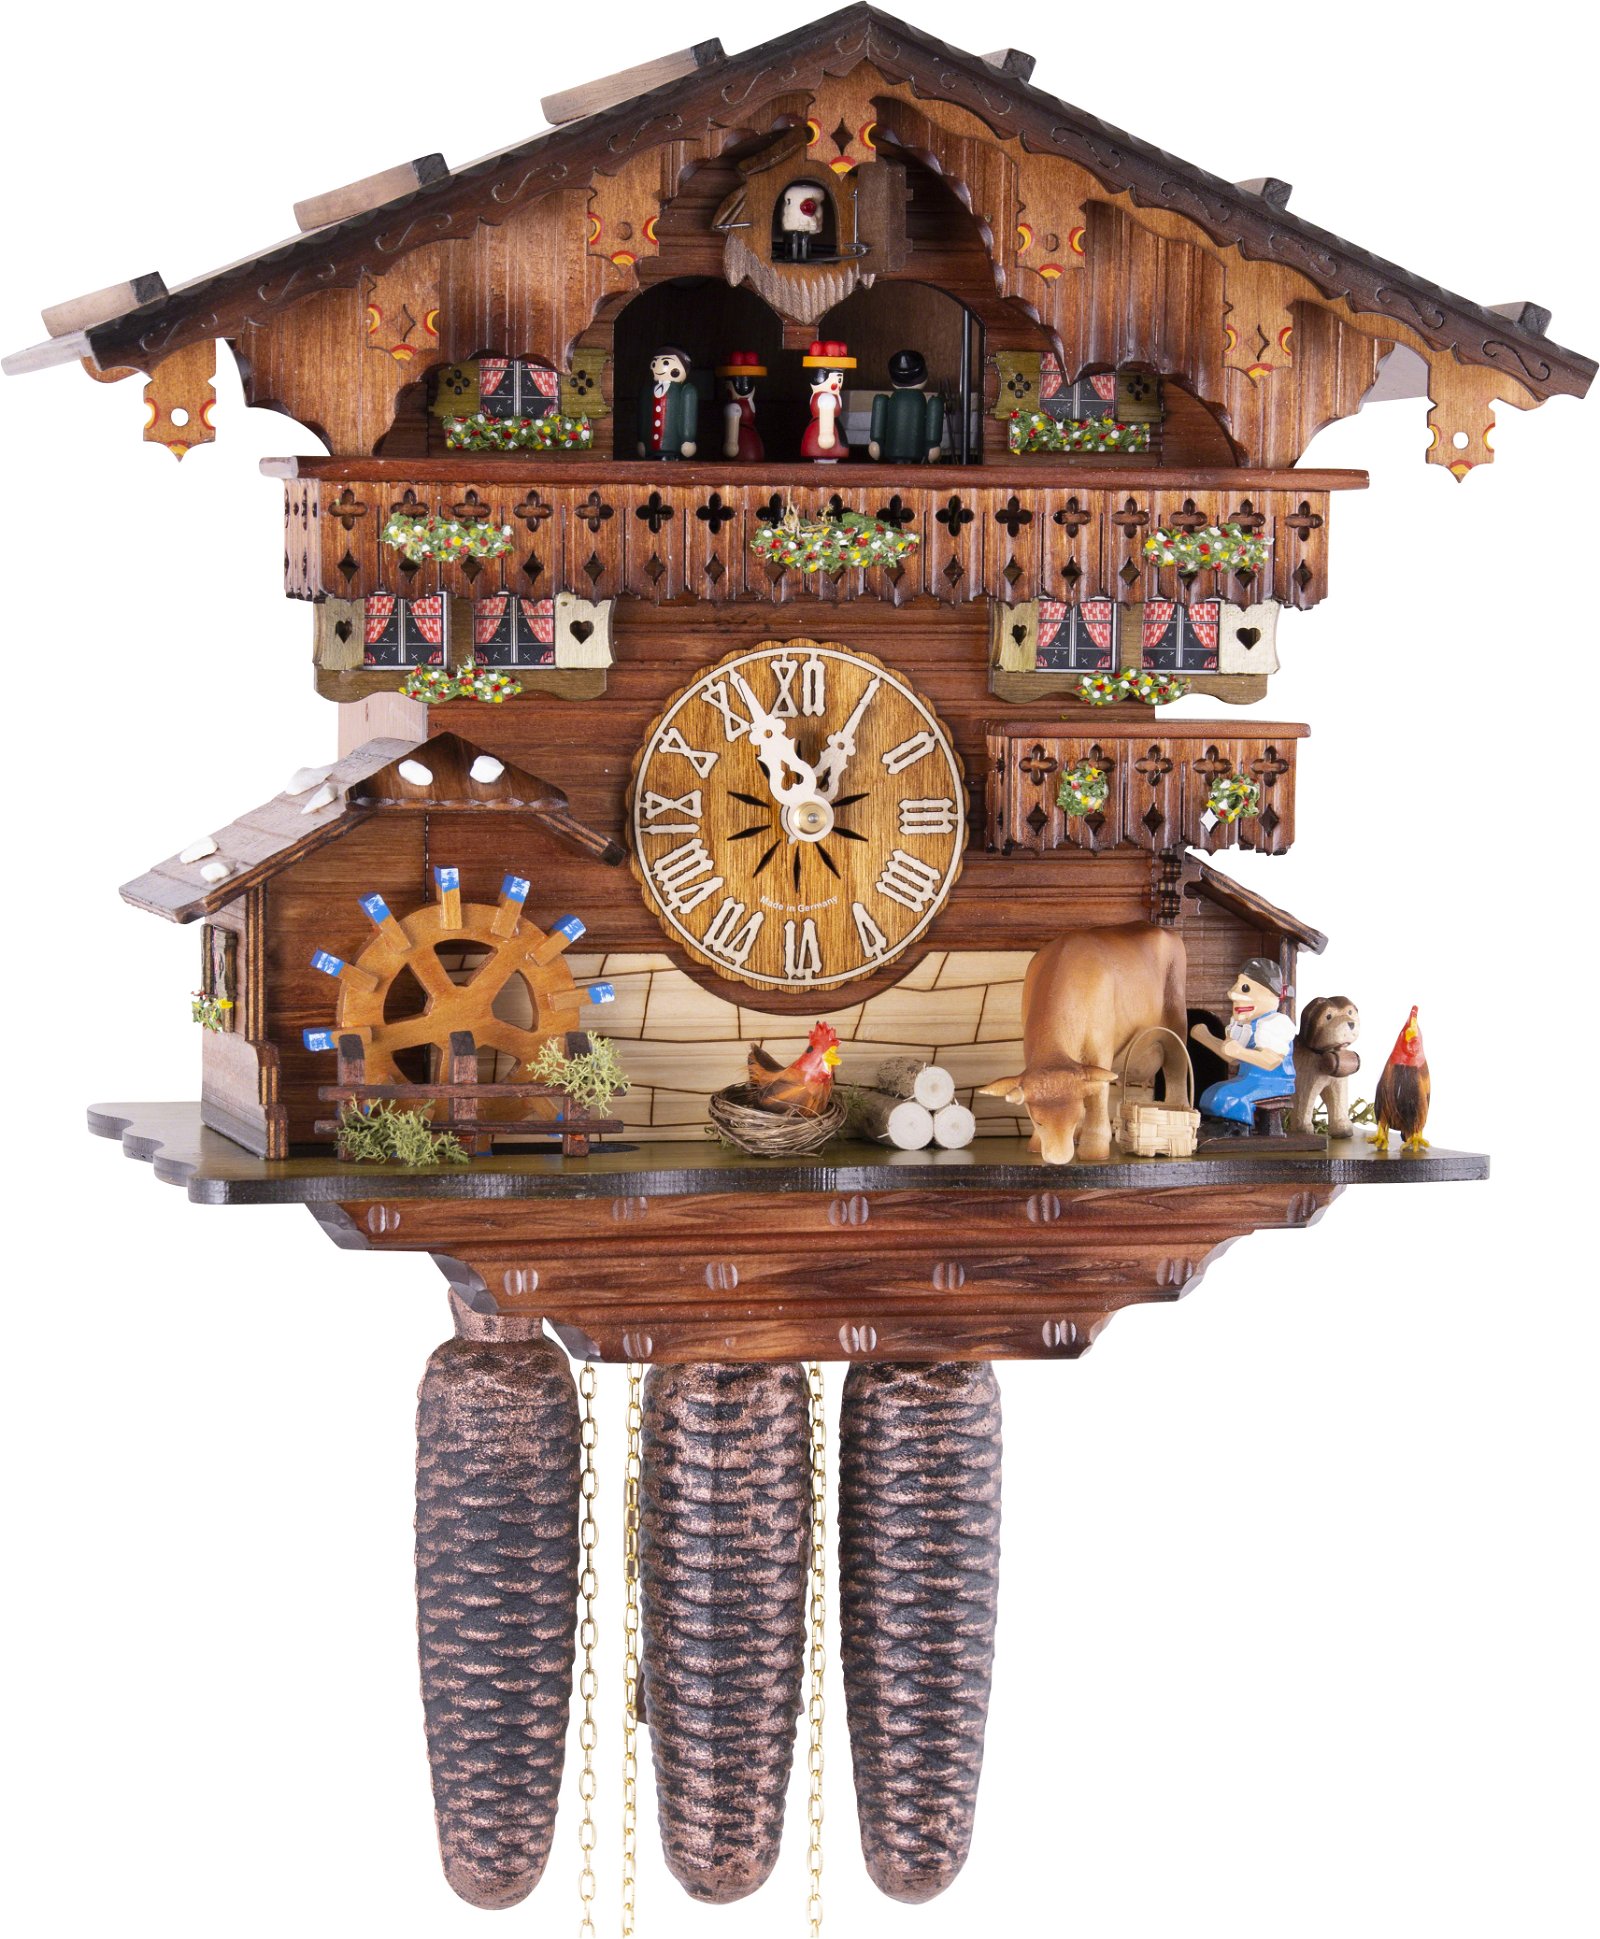 Cuckoo Clock 8-day-movement Chalet-Style 33cm by Hekas - 3623/8 EX